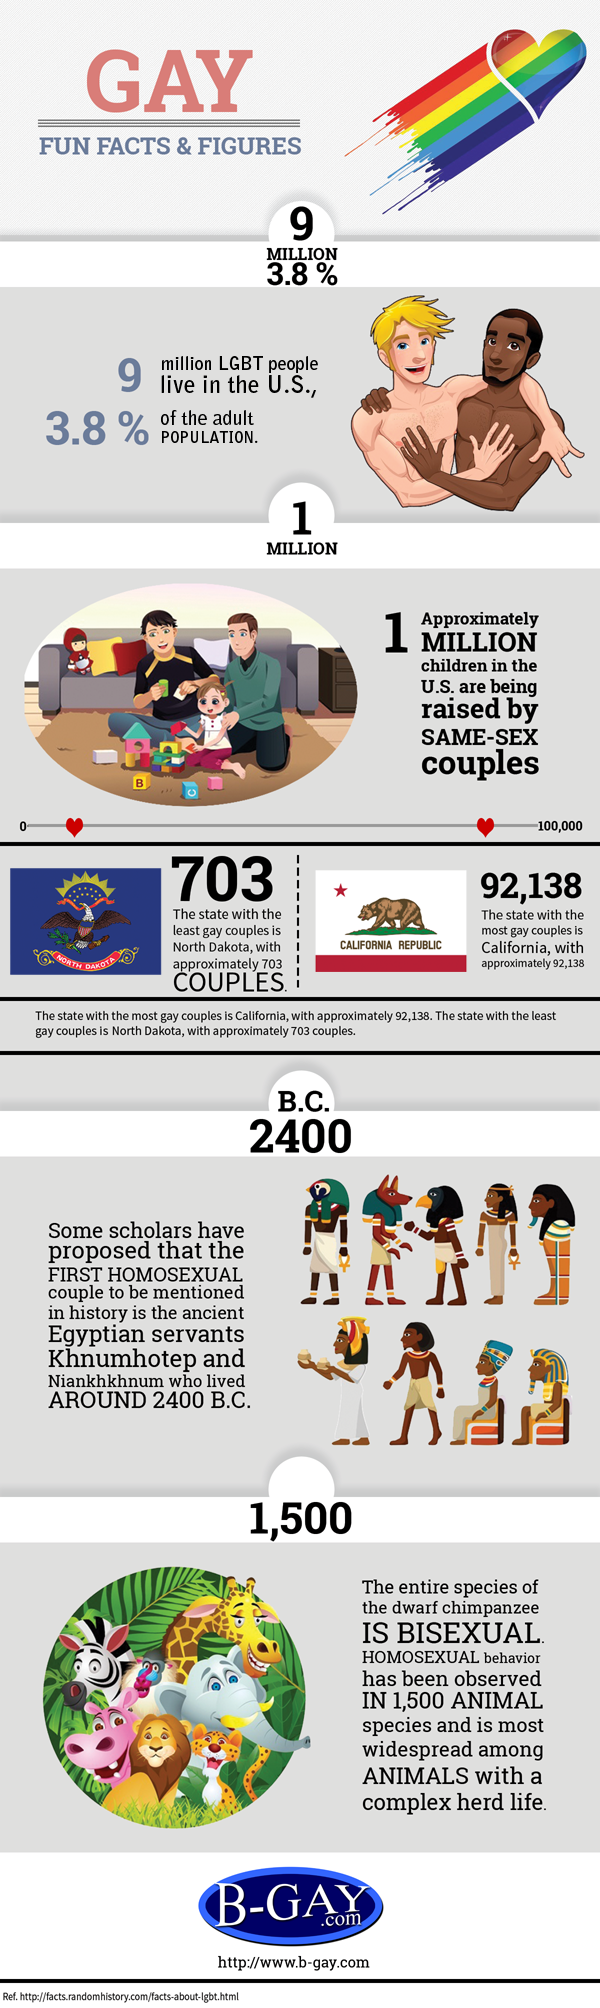 Infographic: Gay Love Fun Facts & Figures | B-Gay